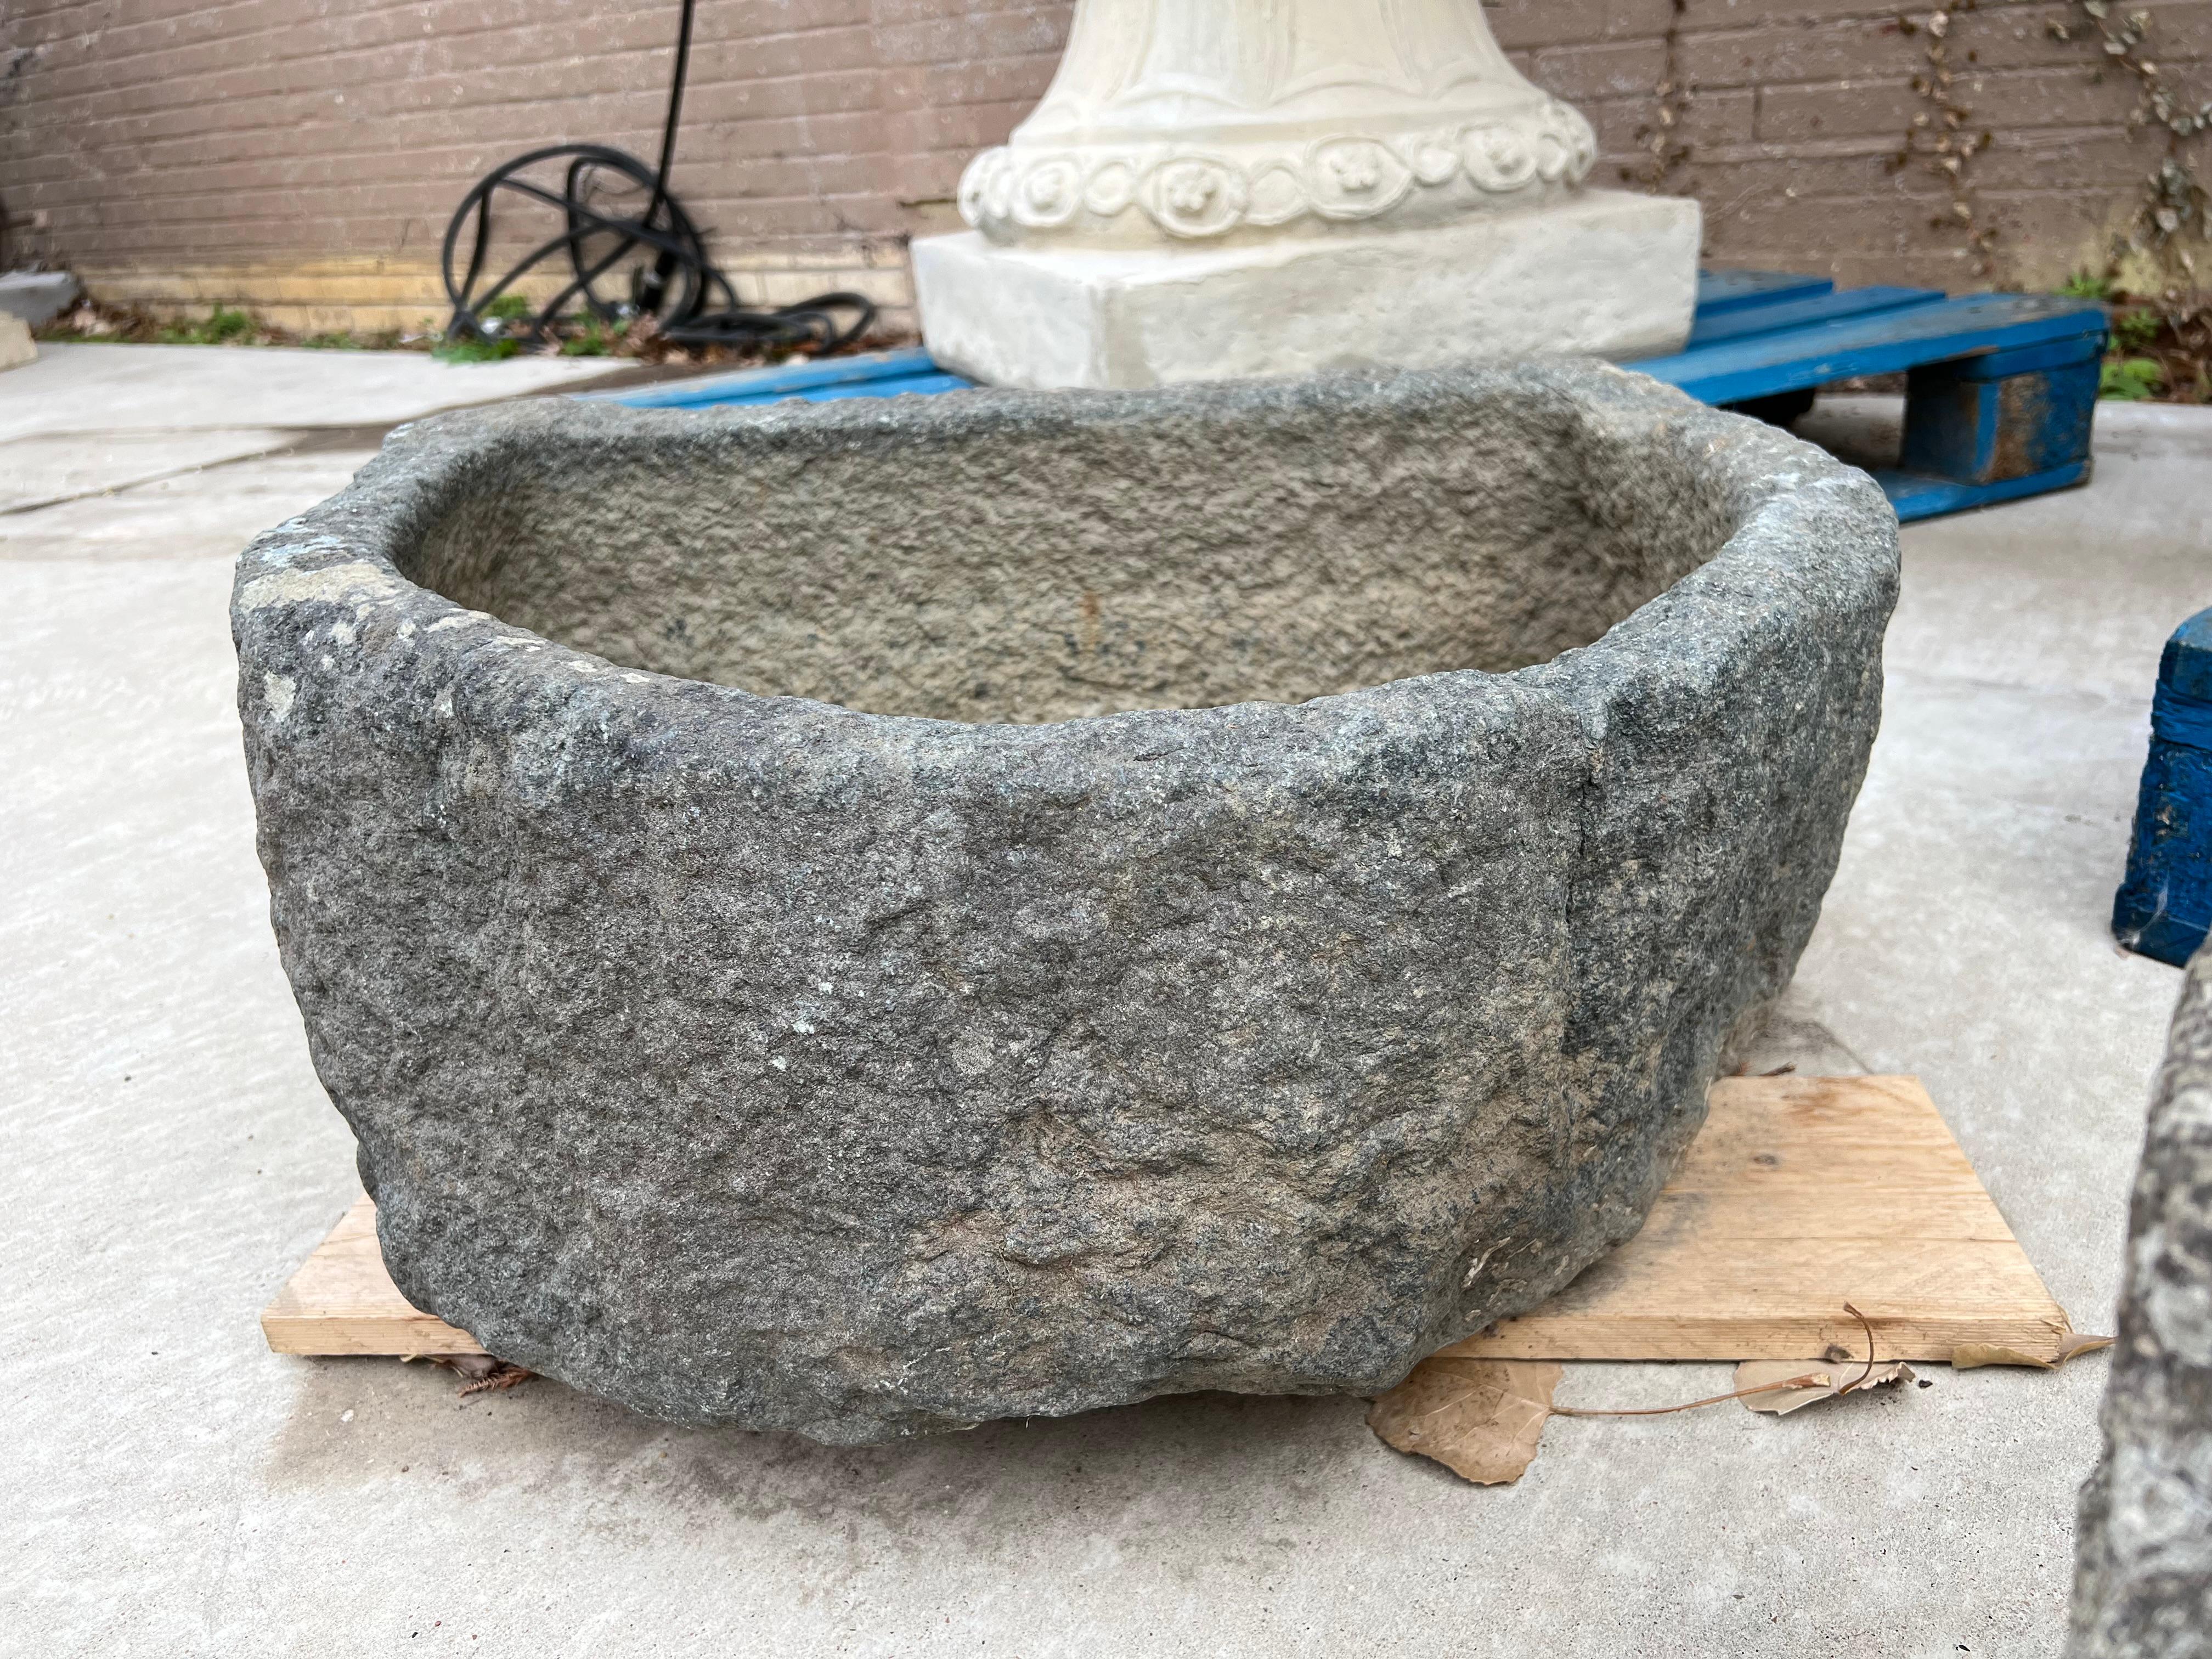 This robust demi-lune trough was hand carved in Normandy, France, in the 1800s. The stone used was a local granite, which is difficult to work with due to its hardness. Dark gray in color, with a natural dotted beige, white, and brown patina, the